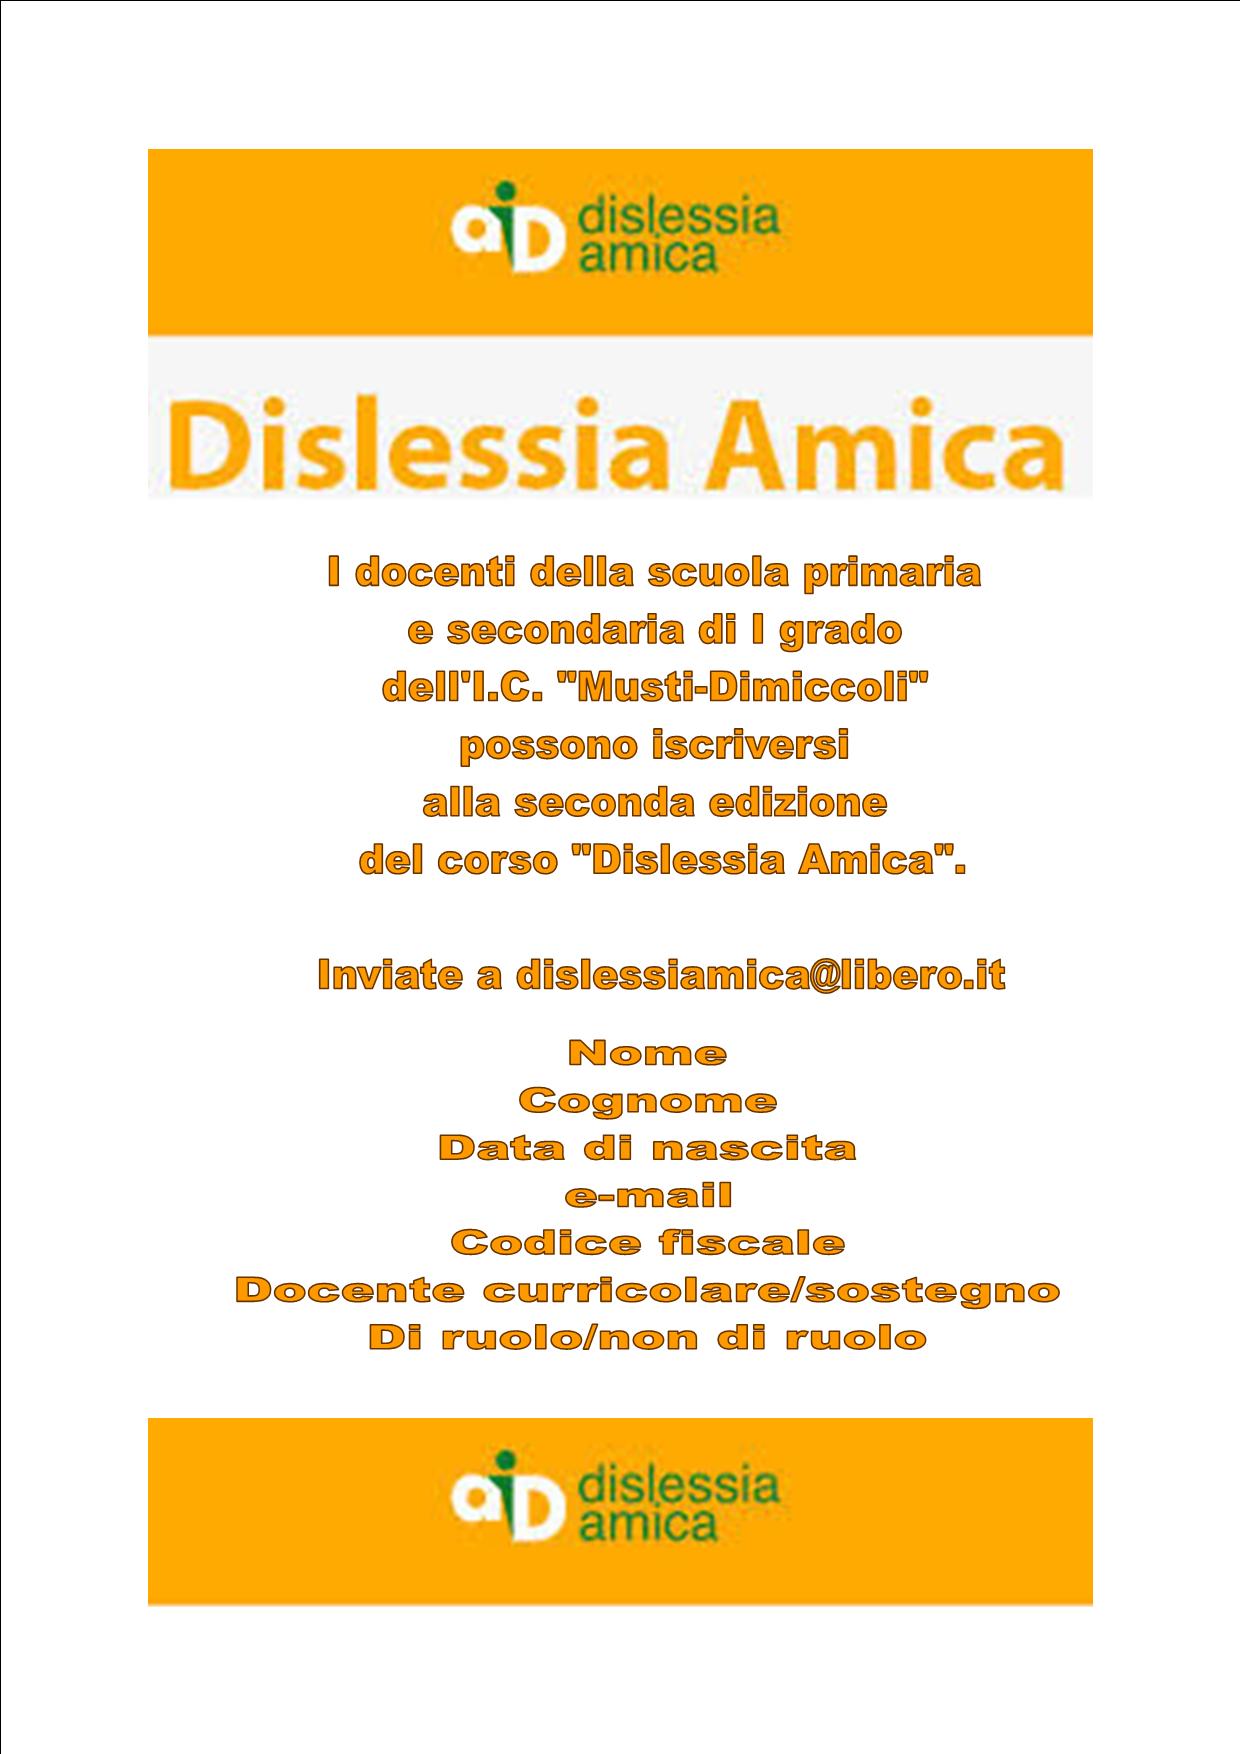 dilsessi amica